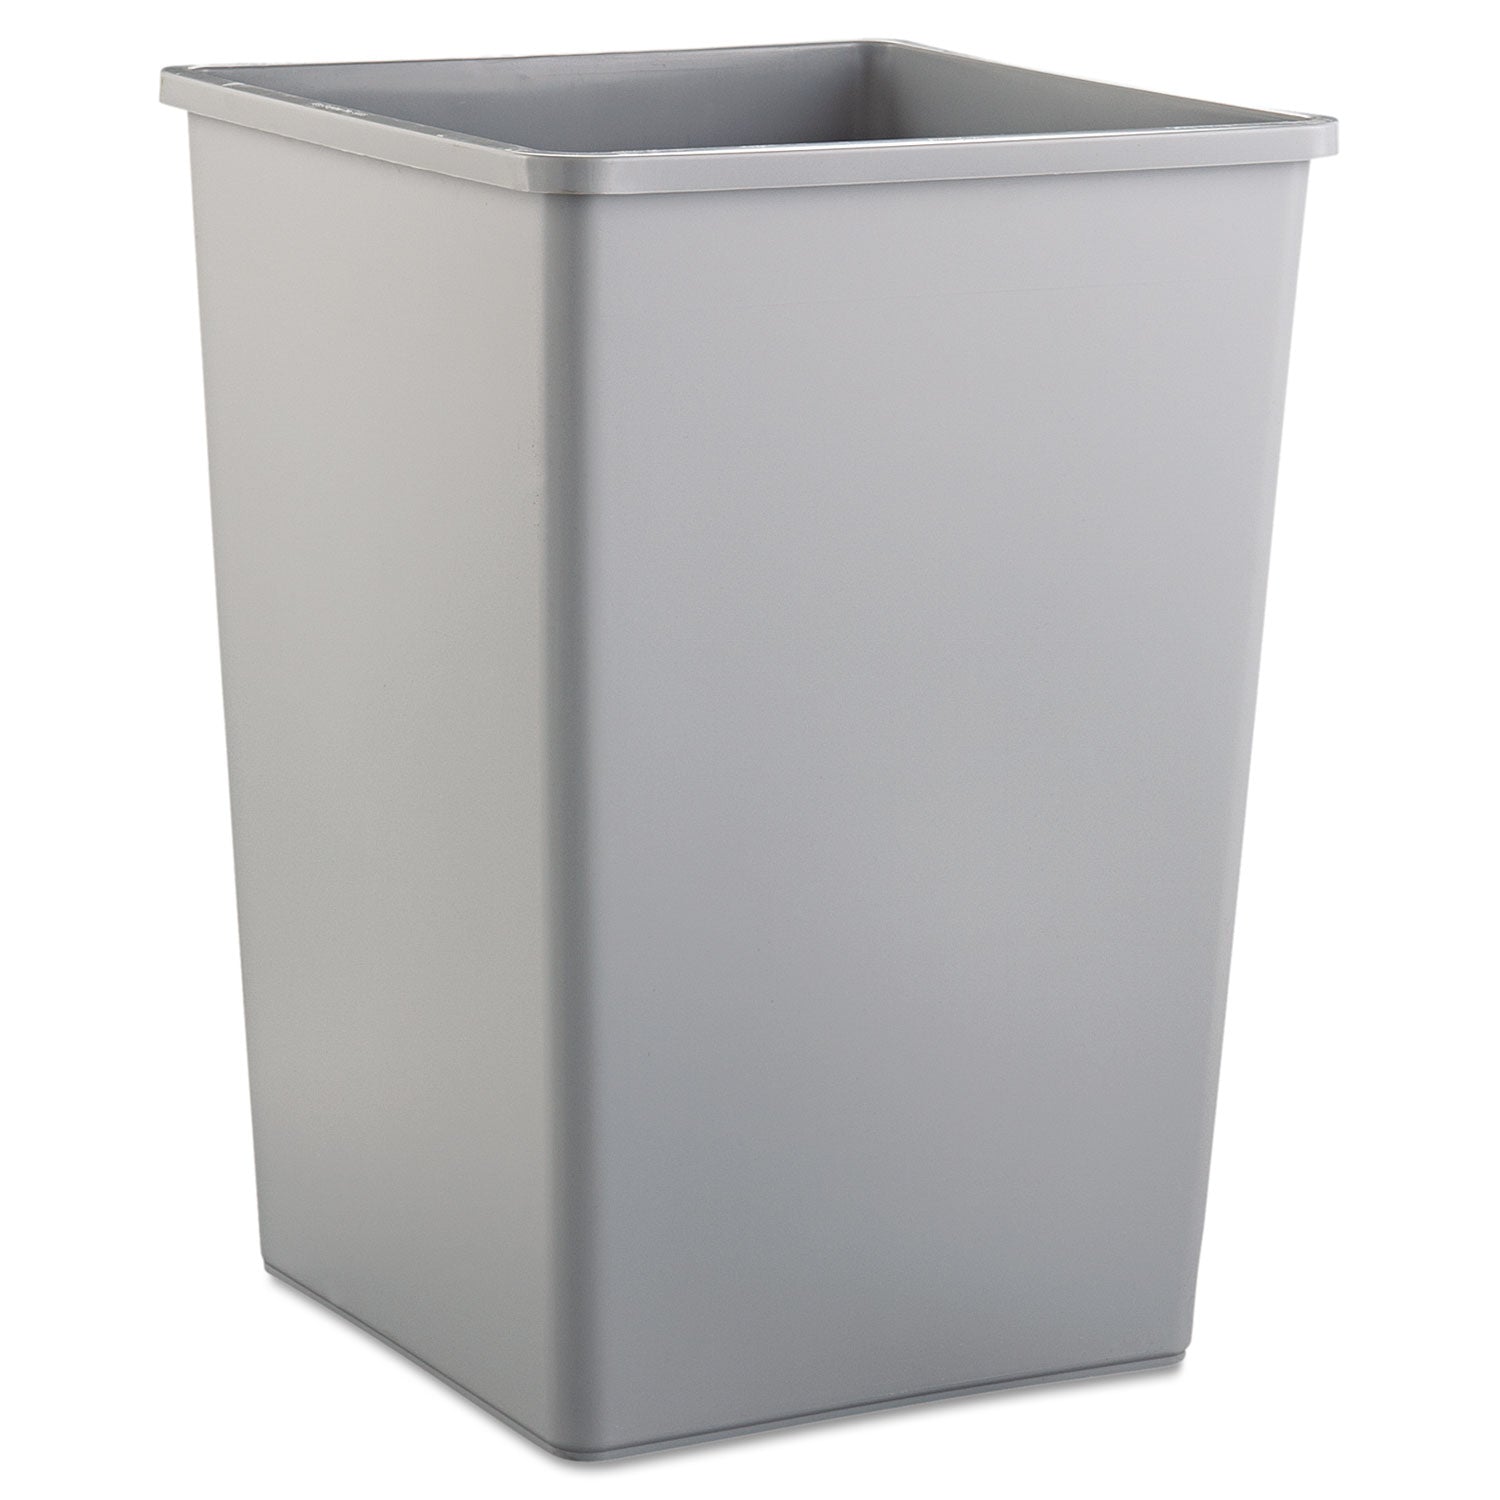 Untouchable Waste Container, Square, Plastic, 35gal, Gray - 1